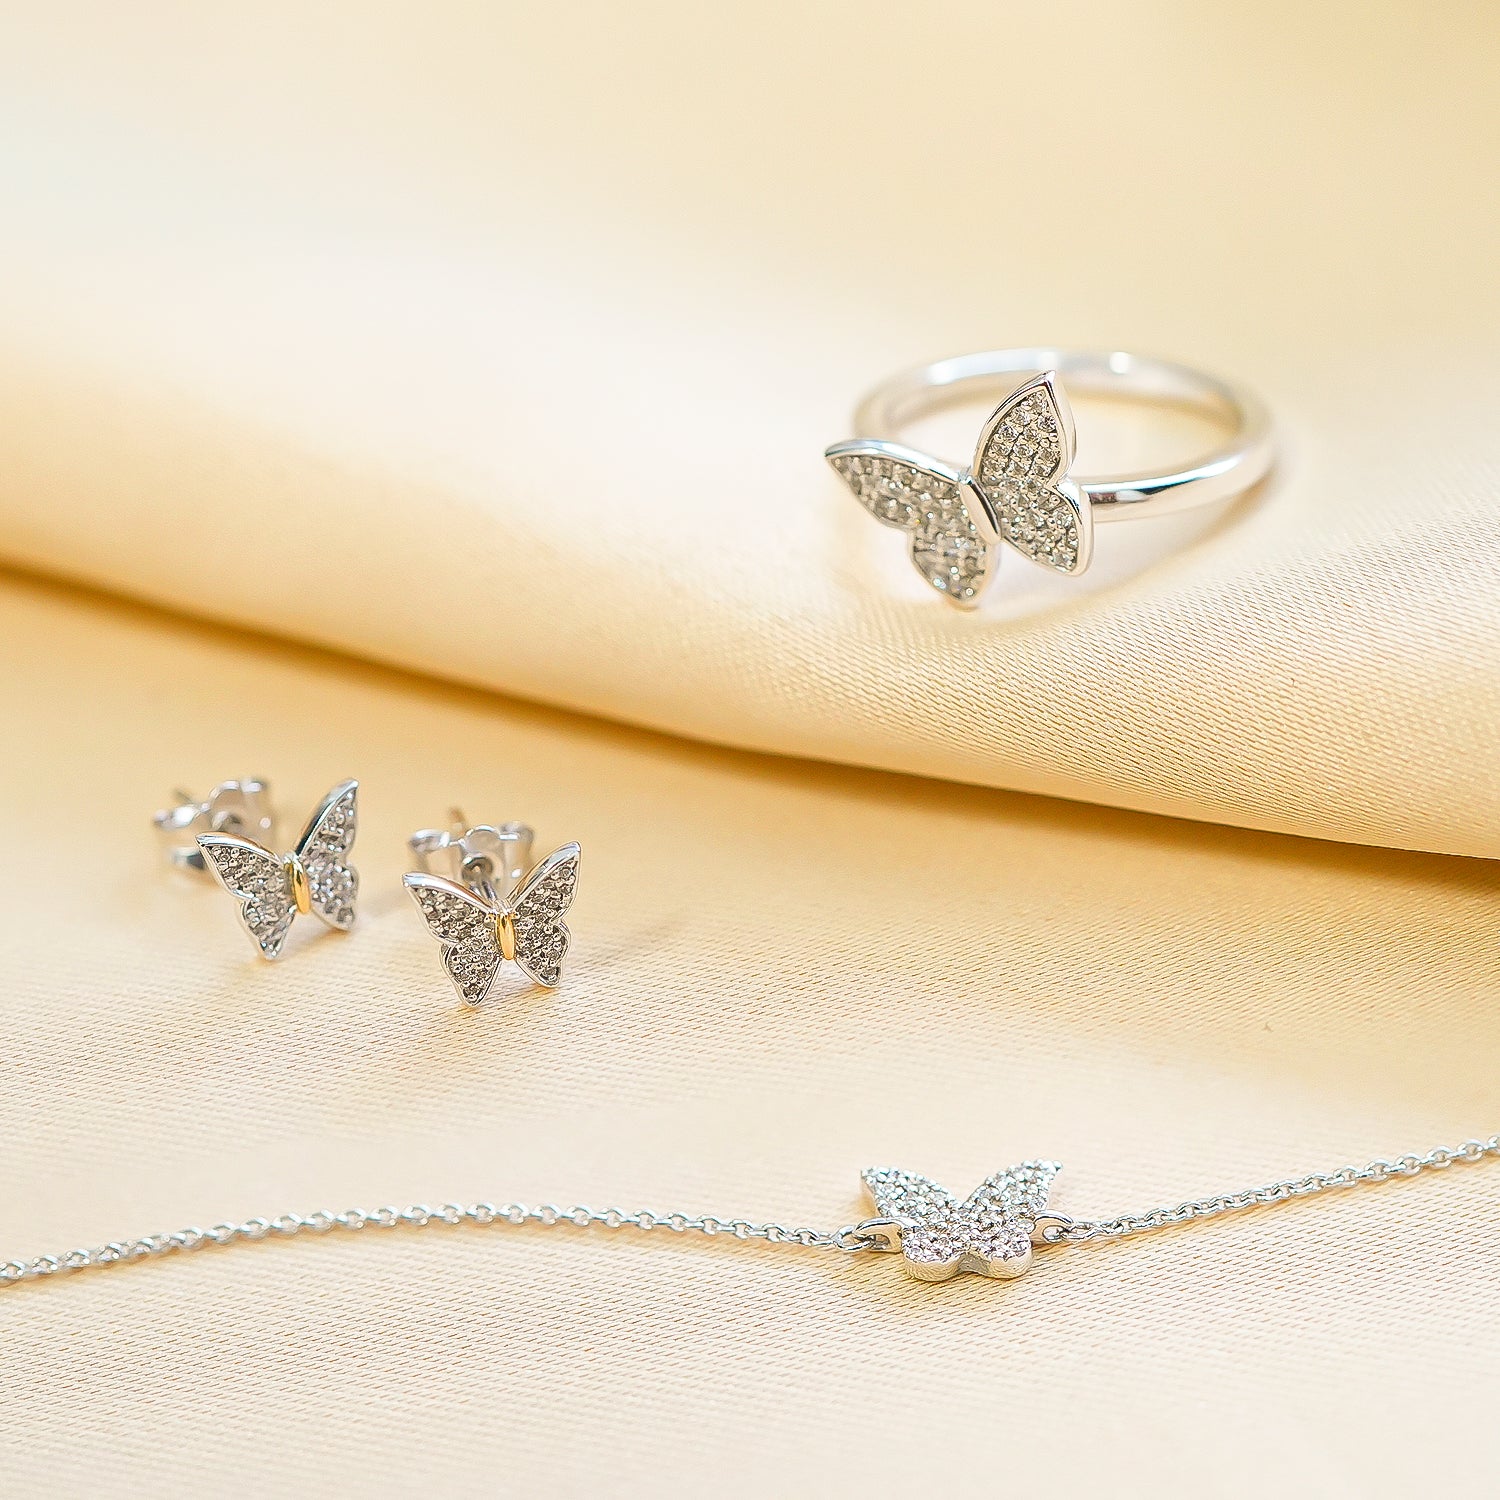 Brie Diamond Butterfly Bracelet with Rings